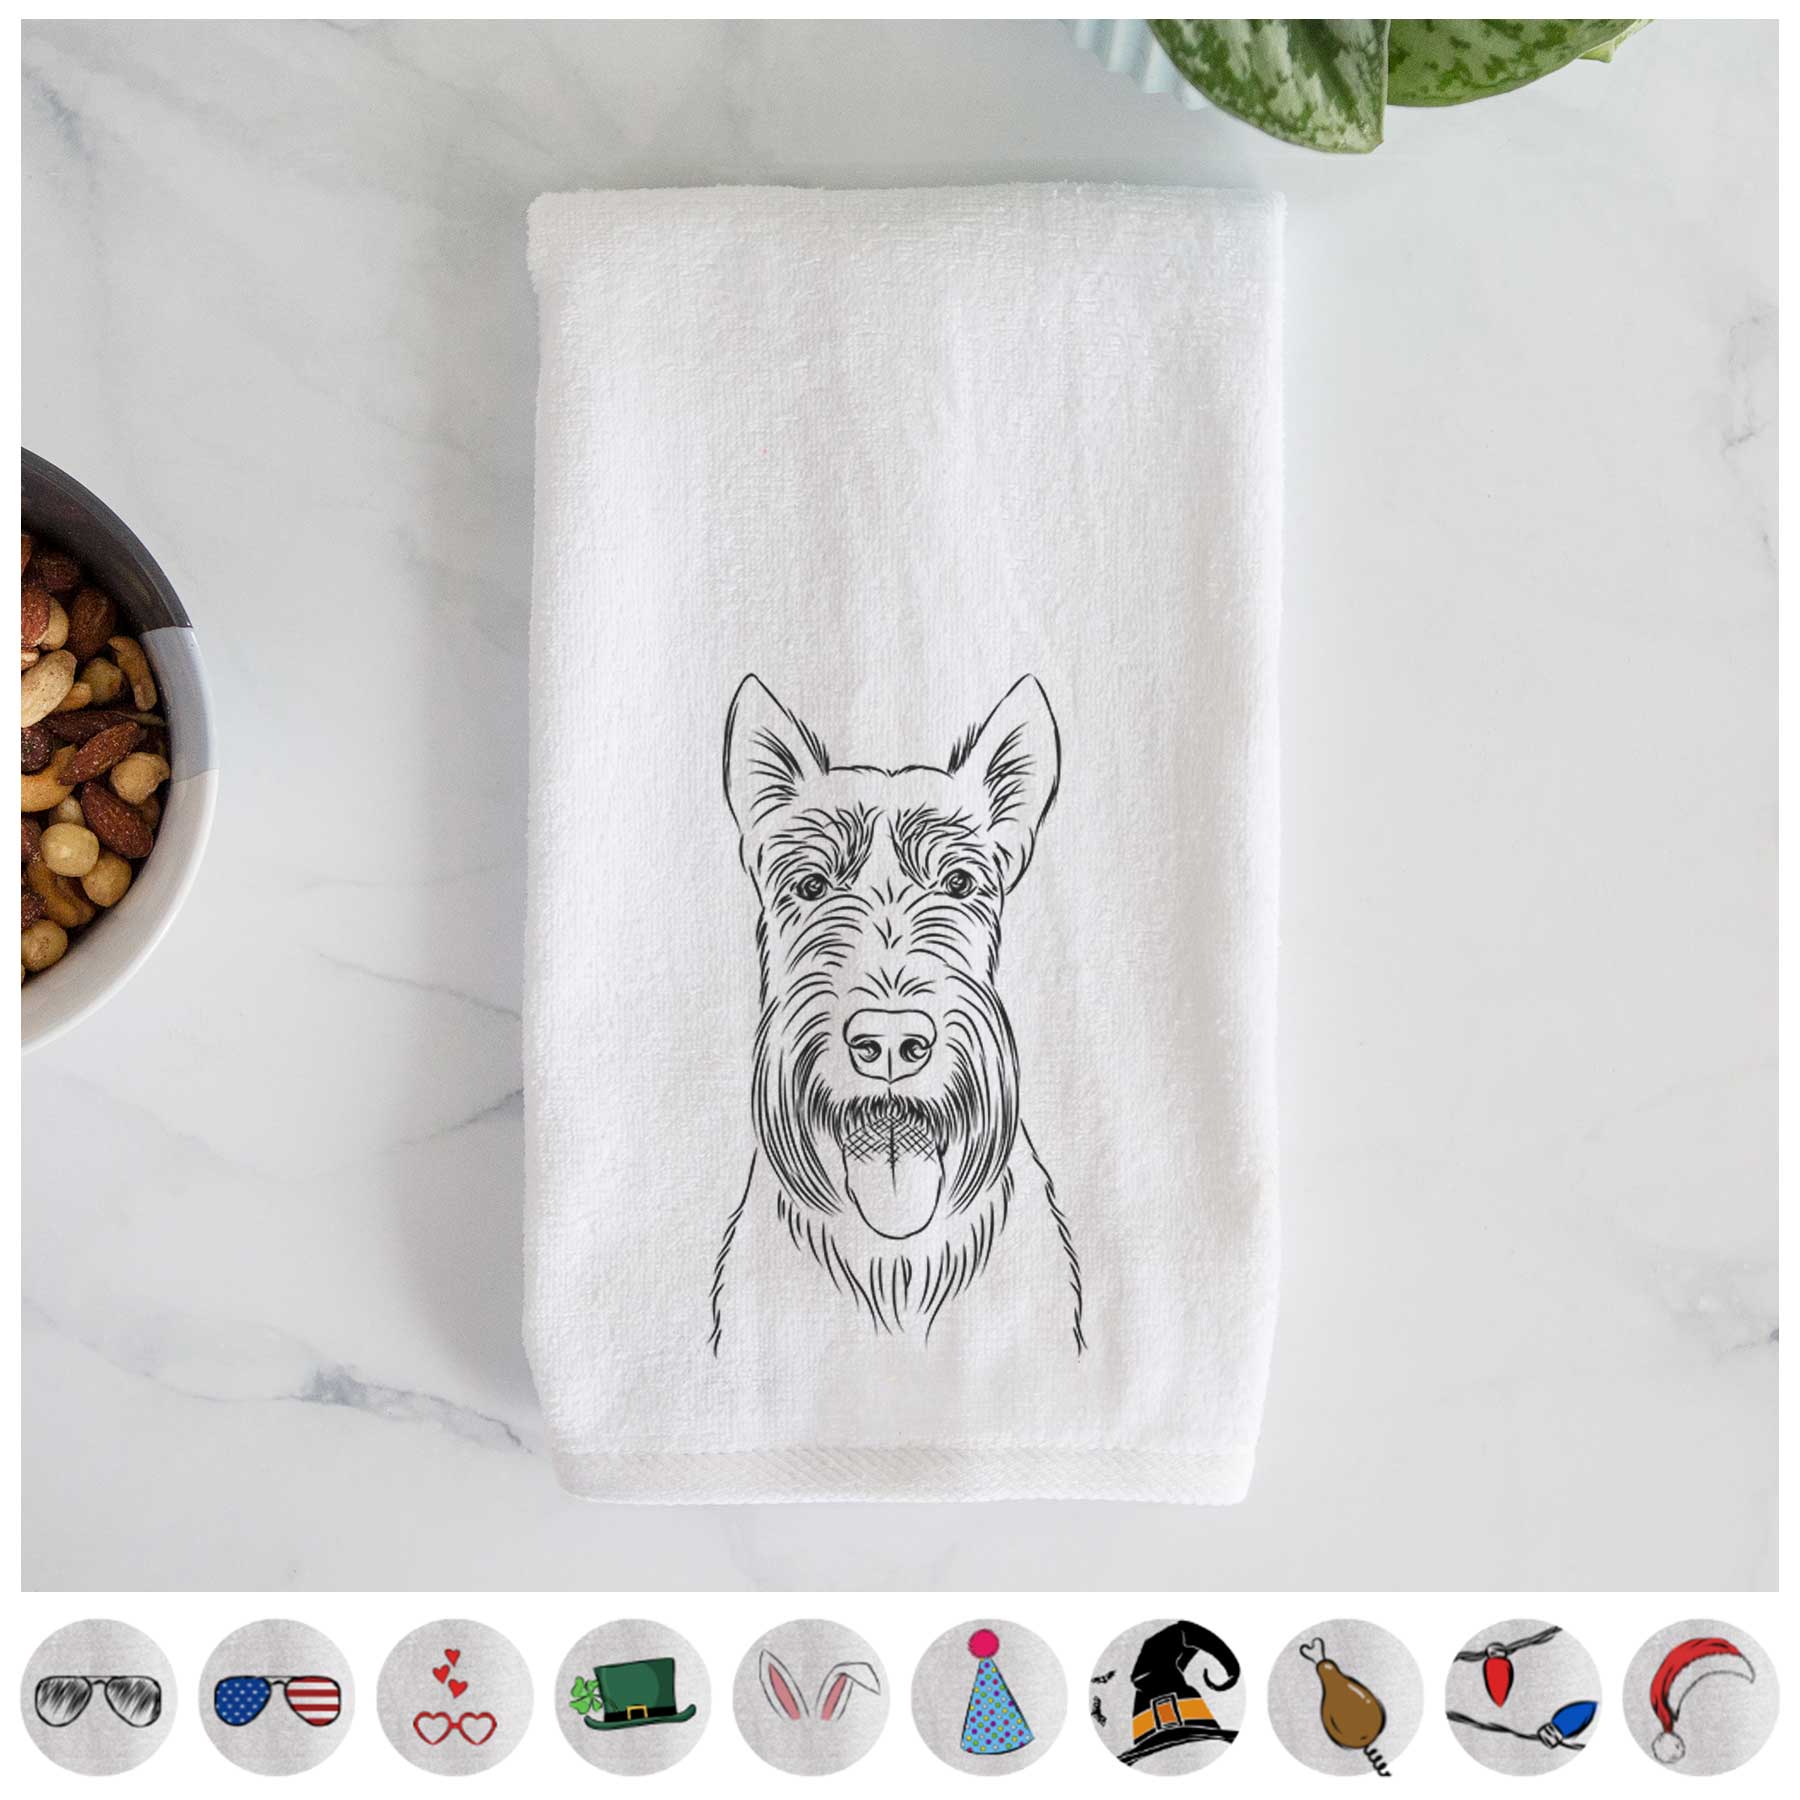 Oswald the Scottish Terrier Hand Towel